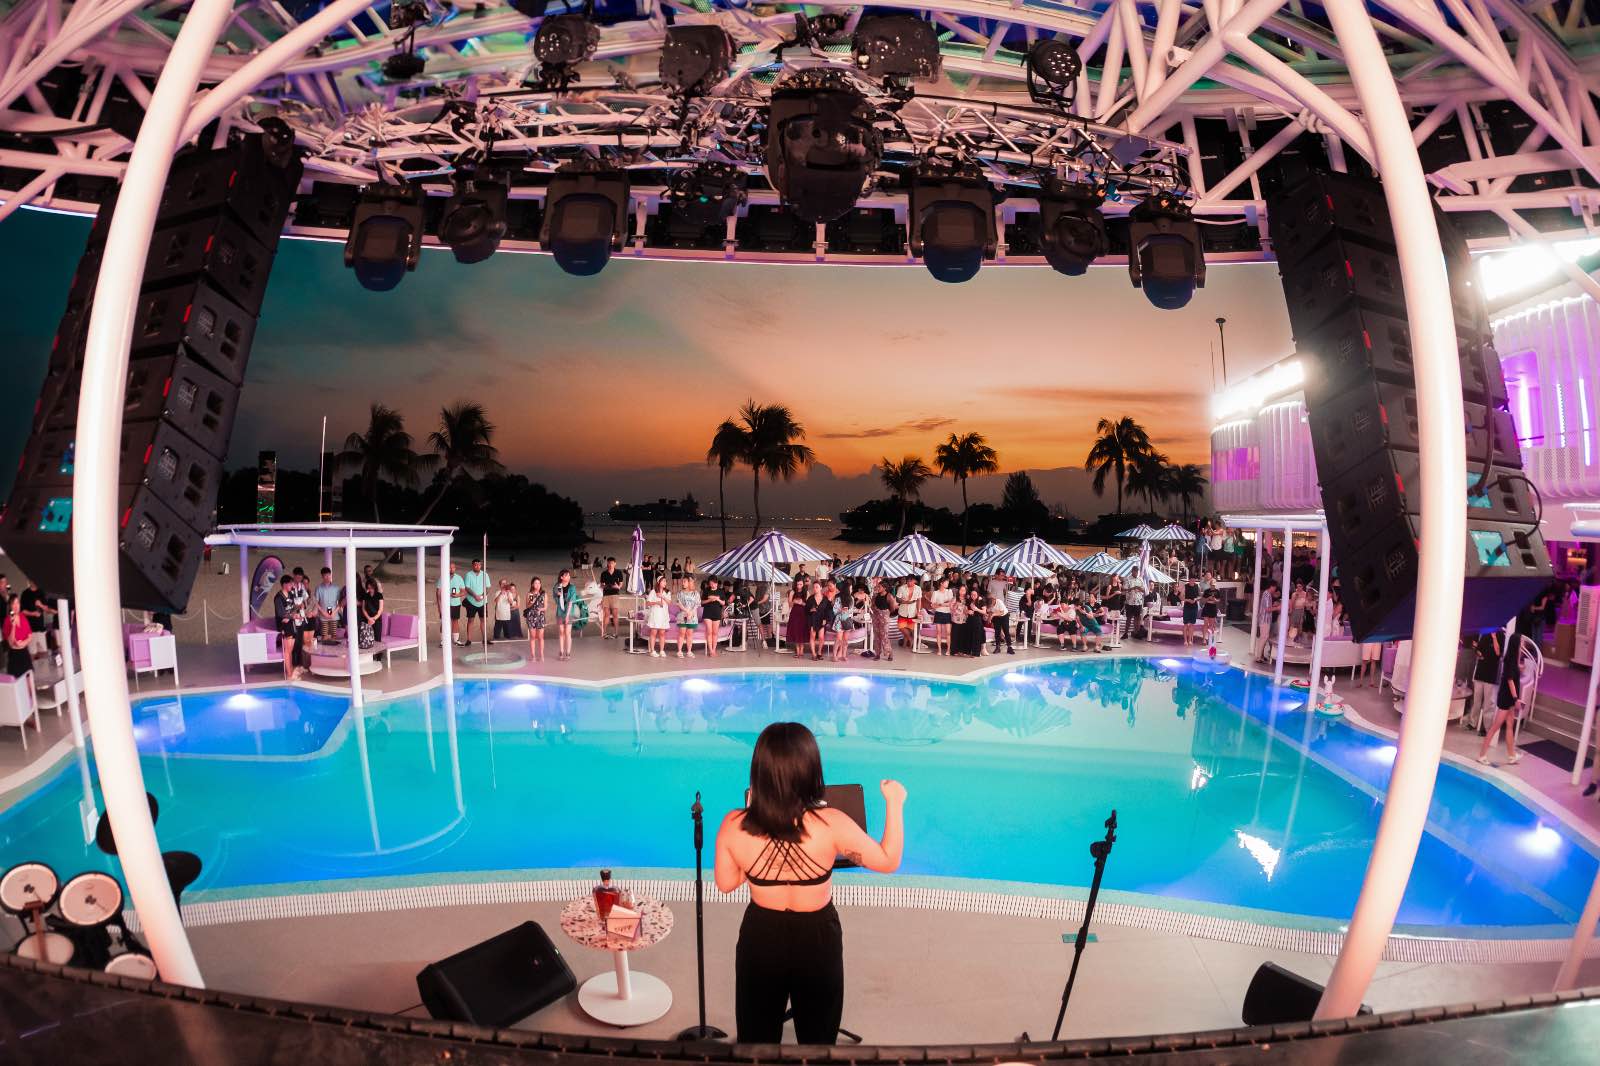 , Tipsy Unicorn Beach Club in Sentosa is a vibrant tropical playground with gorgeous views